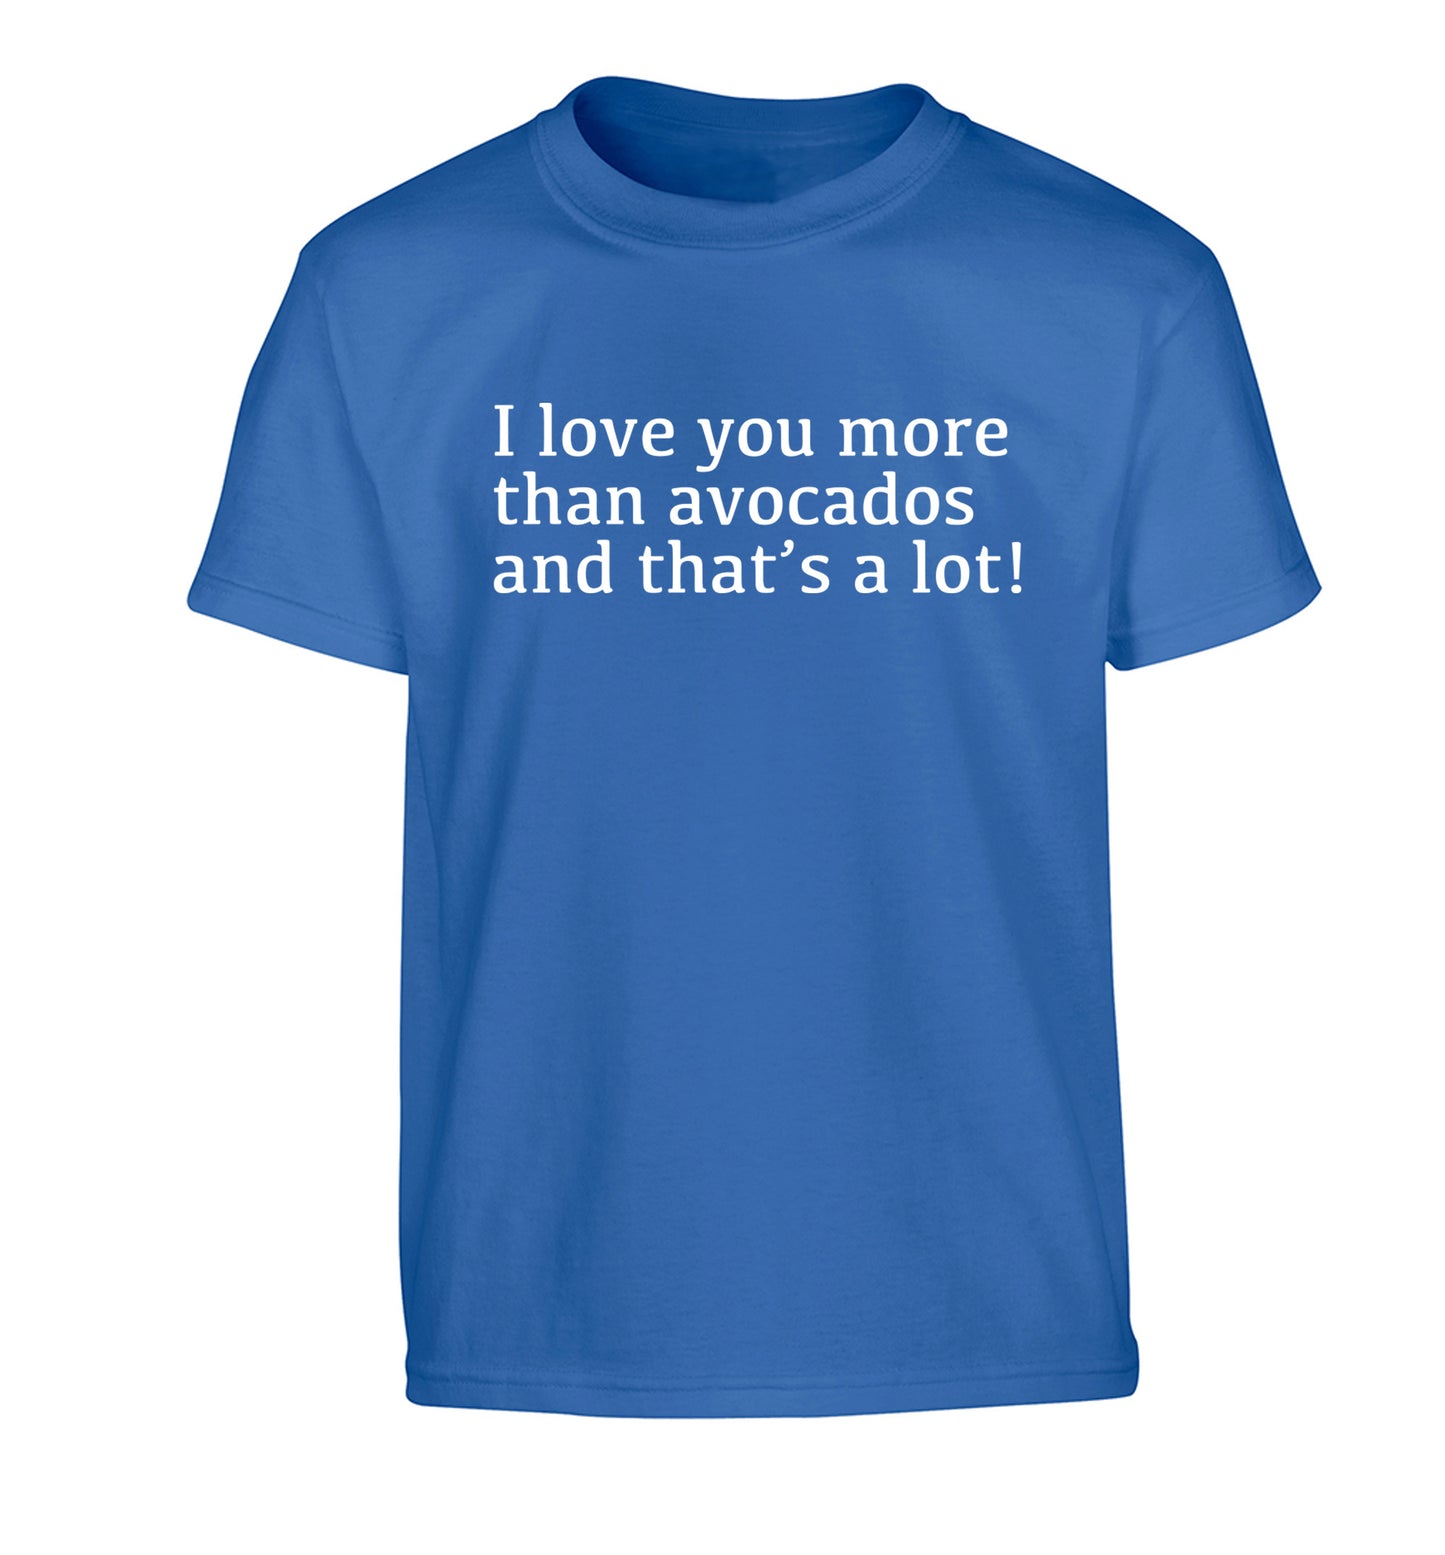 I love you more than avocados and that's a lot Children's blue Tshirt 12-14 Years